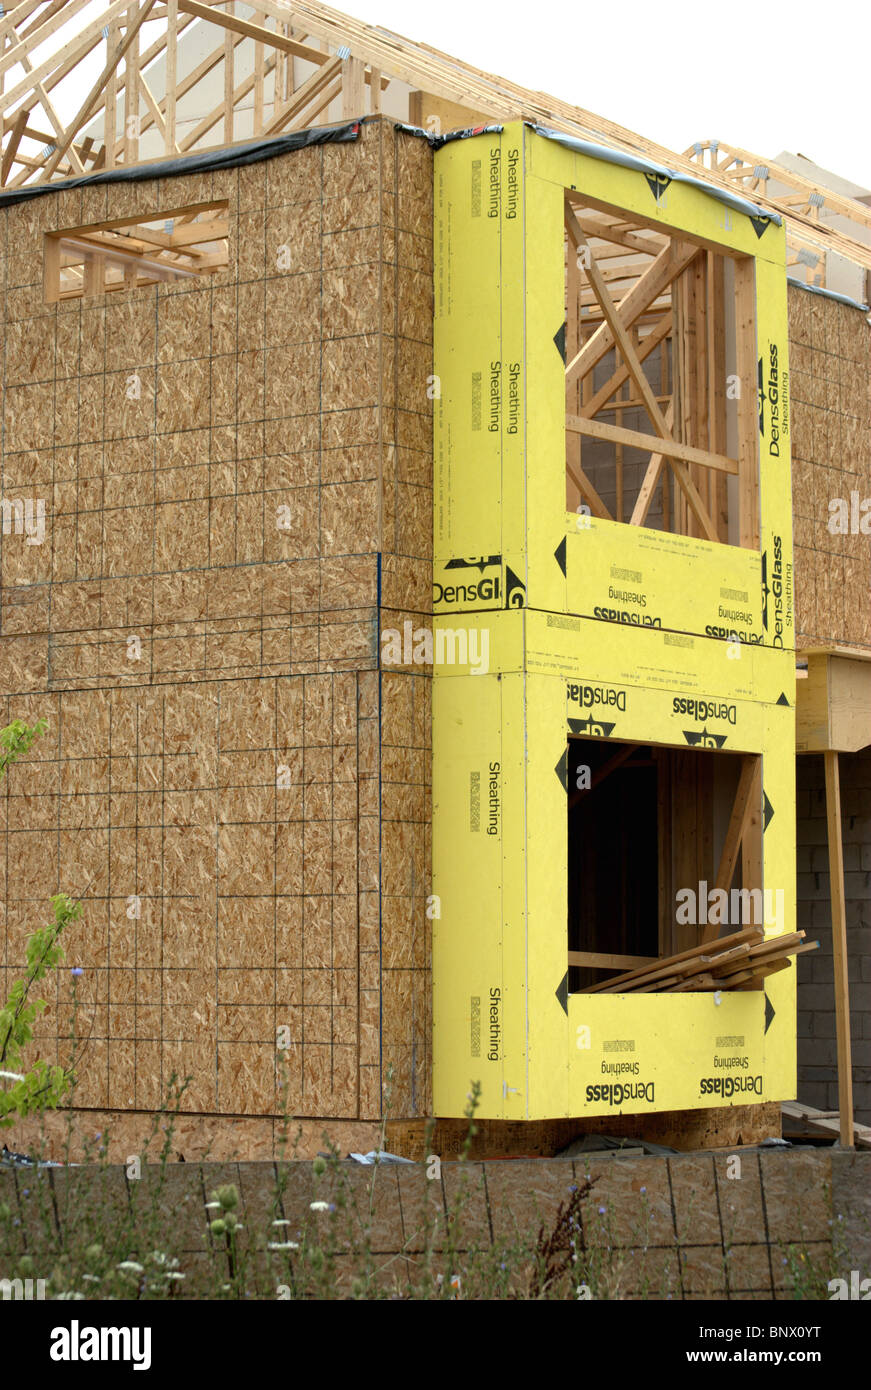 Construction site for town houses showing foundation and wood framing. Stock Photo